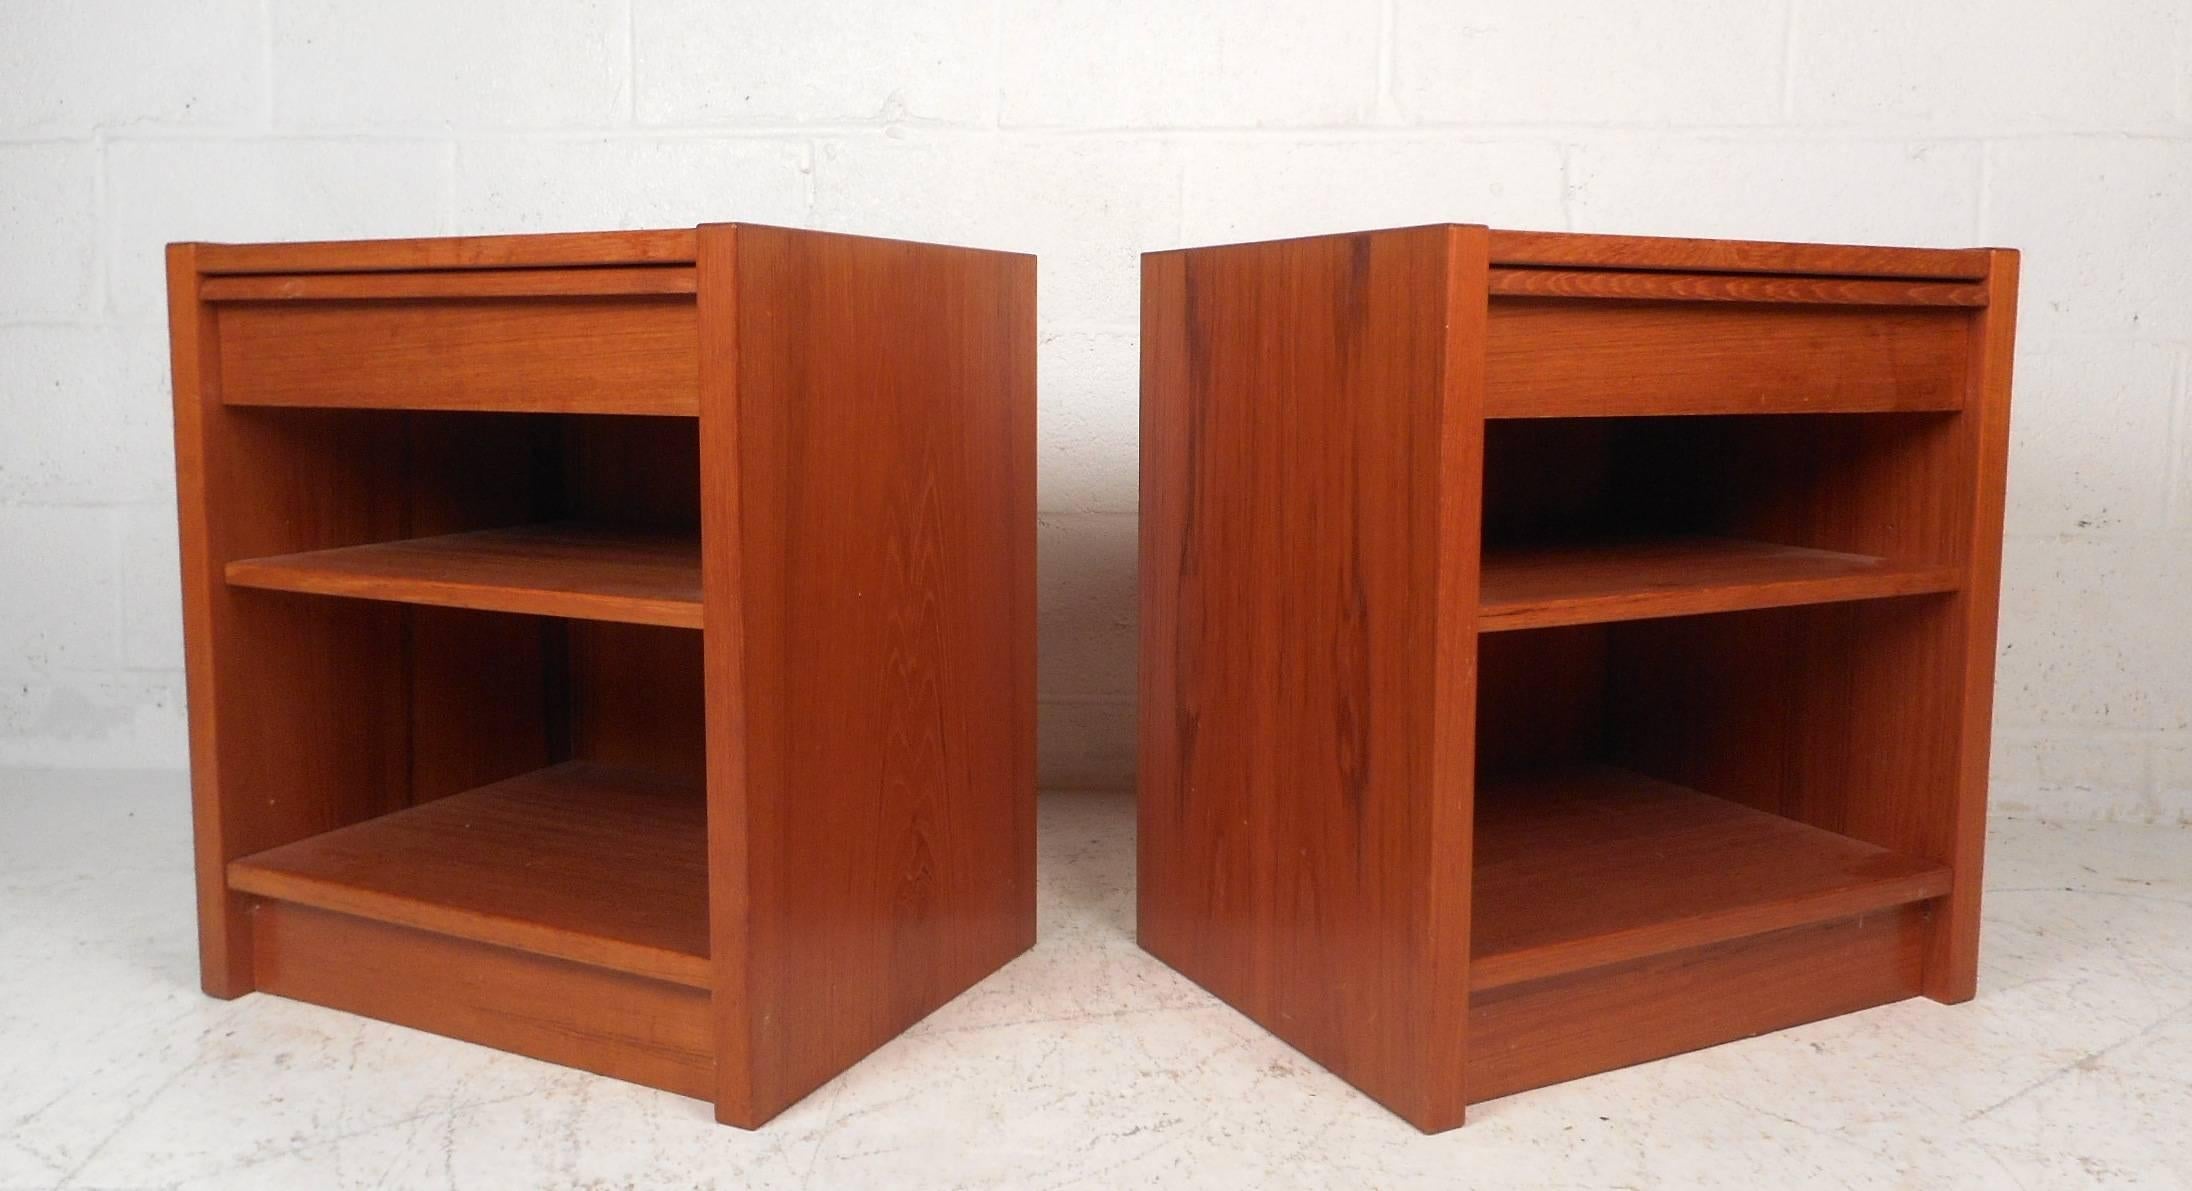 This gorgeous pair of vintage modern end tables feature one drawer and a large compartment with a shelf. Sleek design with plenty of room for storage and elegant teak wood grain throughout. Straight line construction and a unique hidden drawer pull